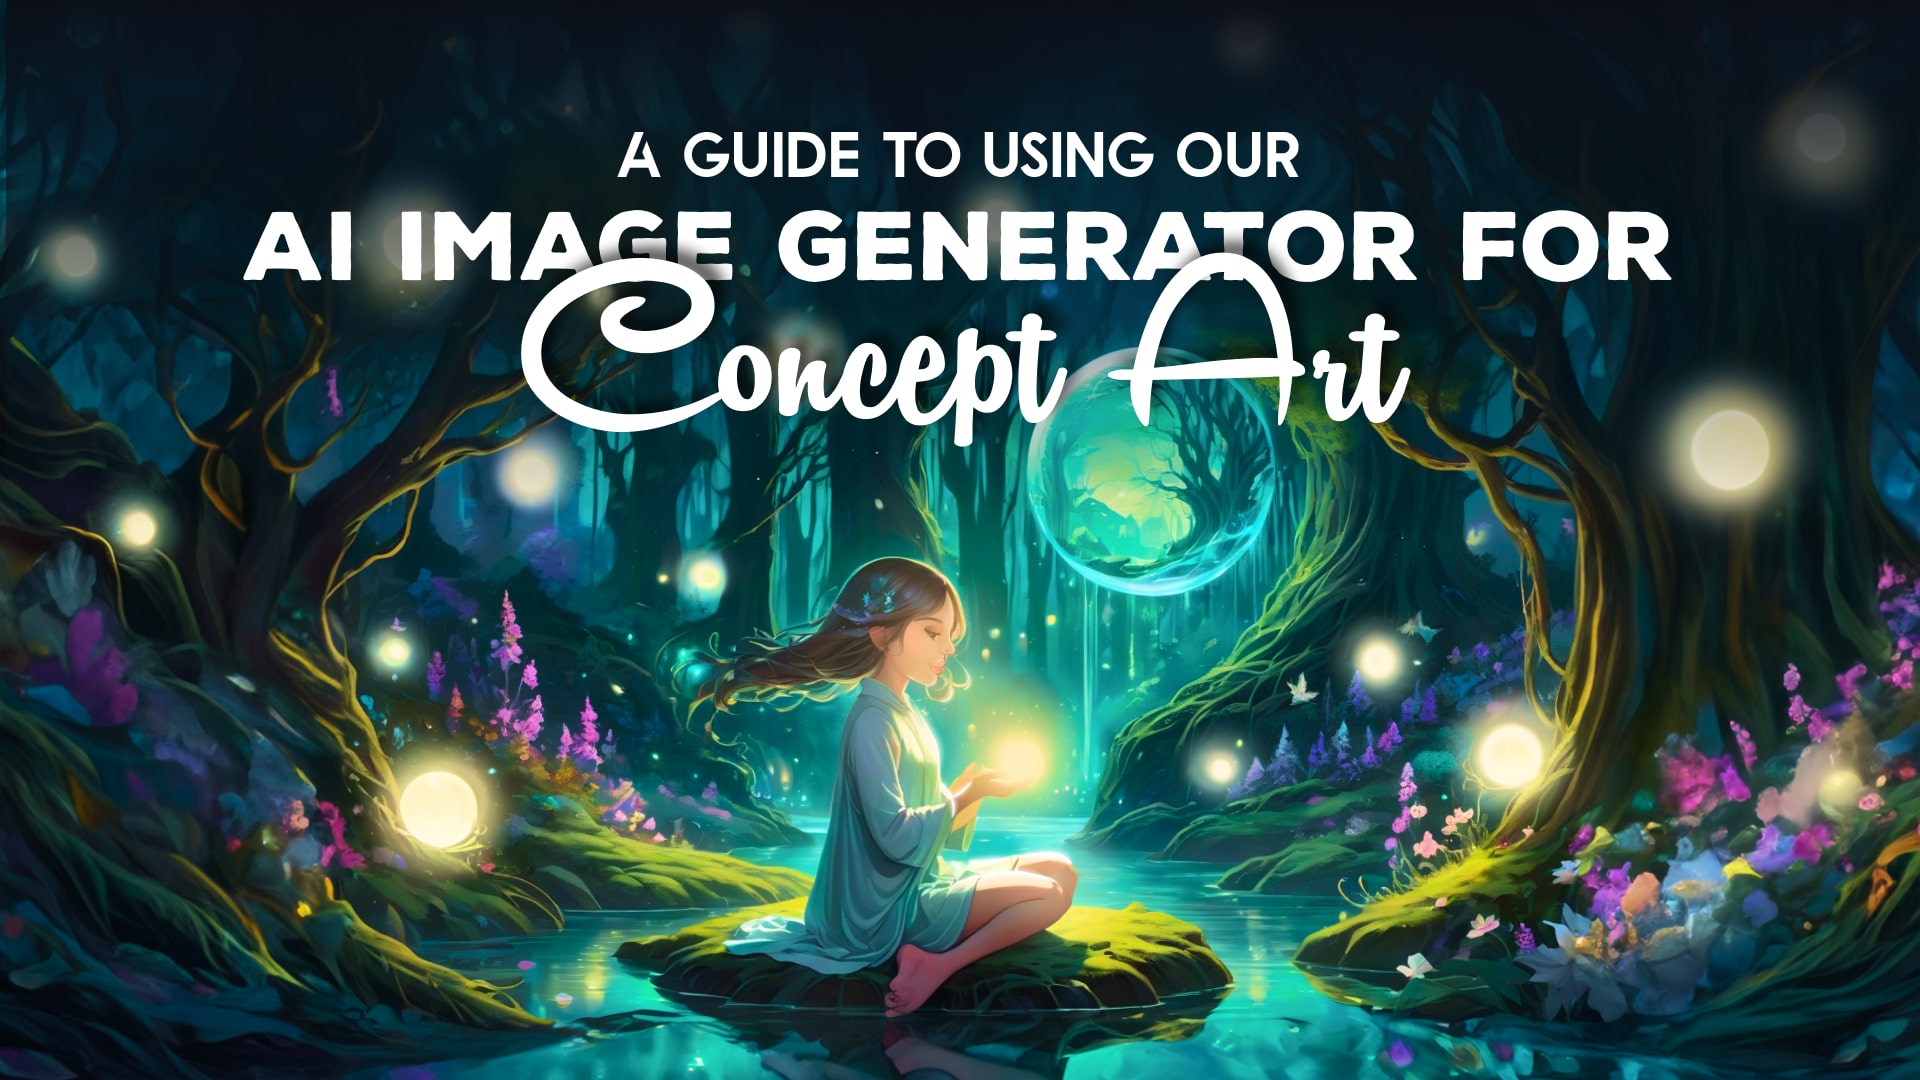 A Guide to Using Our AI Image Generator for Concept Art